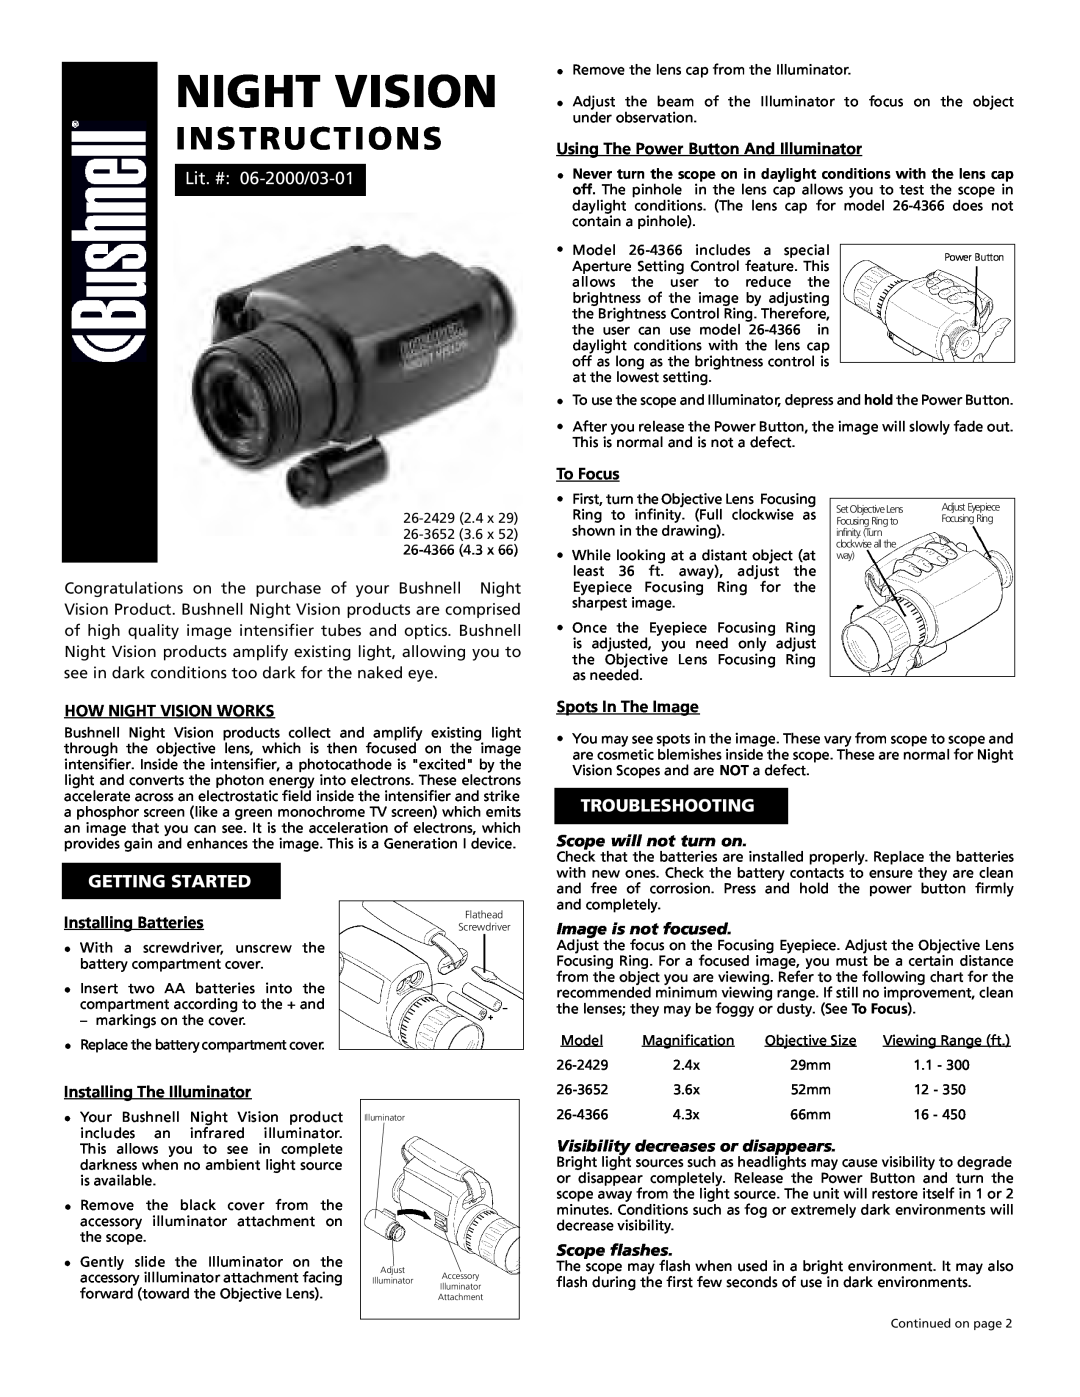 Bushnell 26-4366 manual Troubleshooting, Getting Started, Night Vision, Instructions, Lit. # 06-2000/03-01, To Focus 